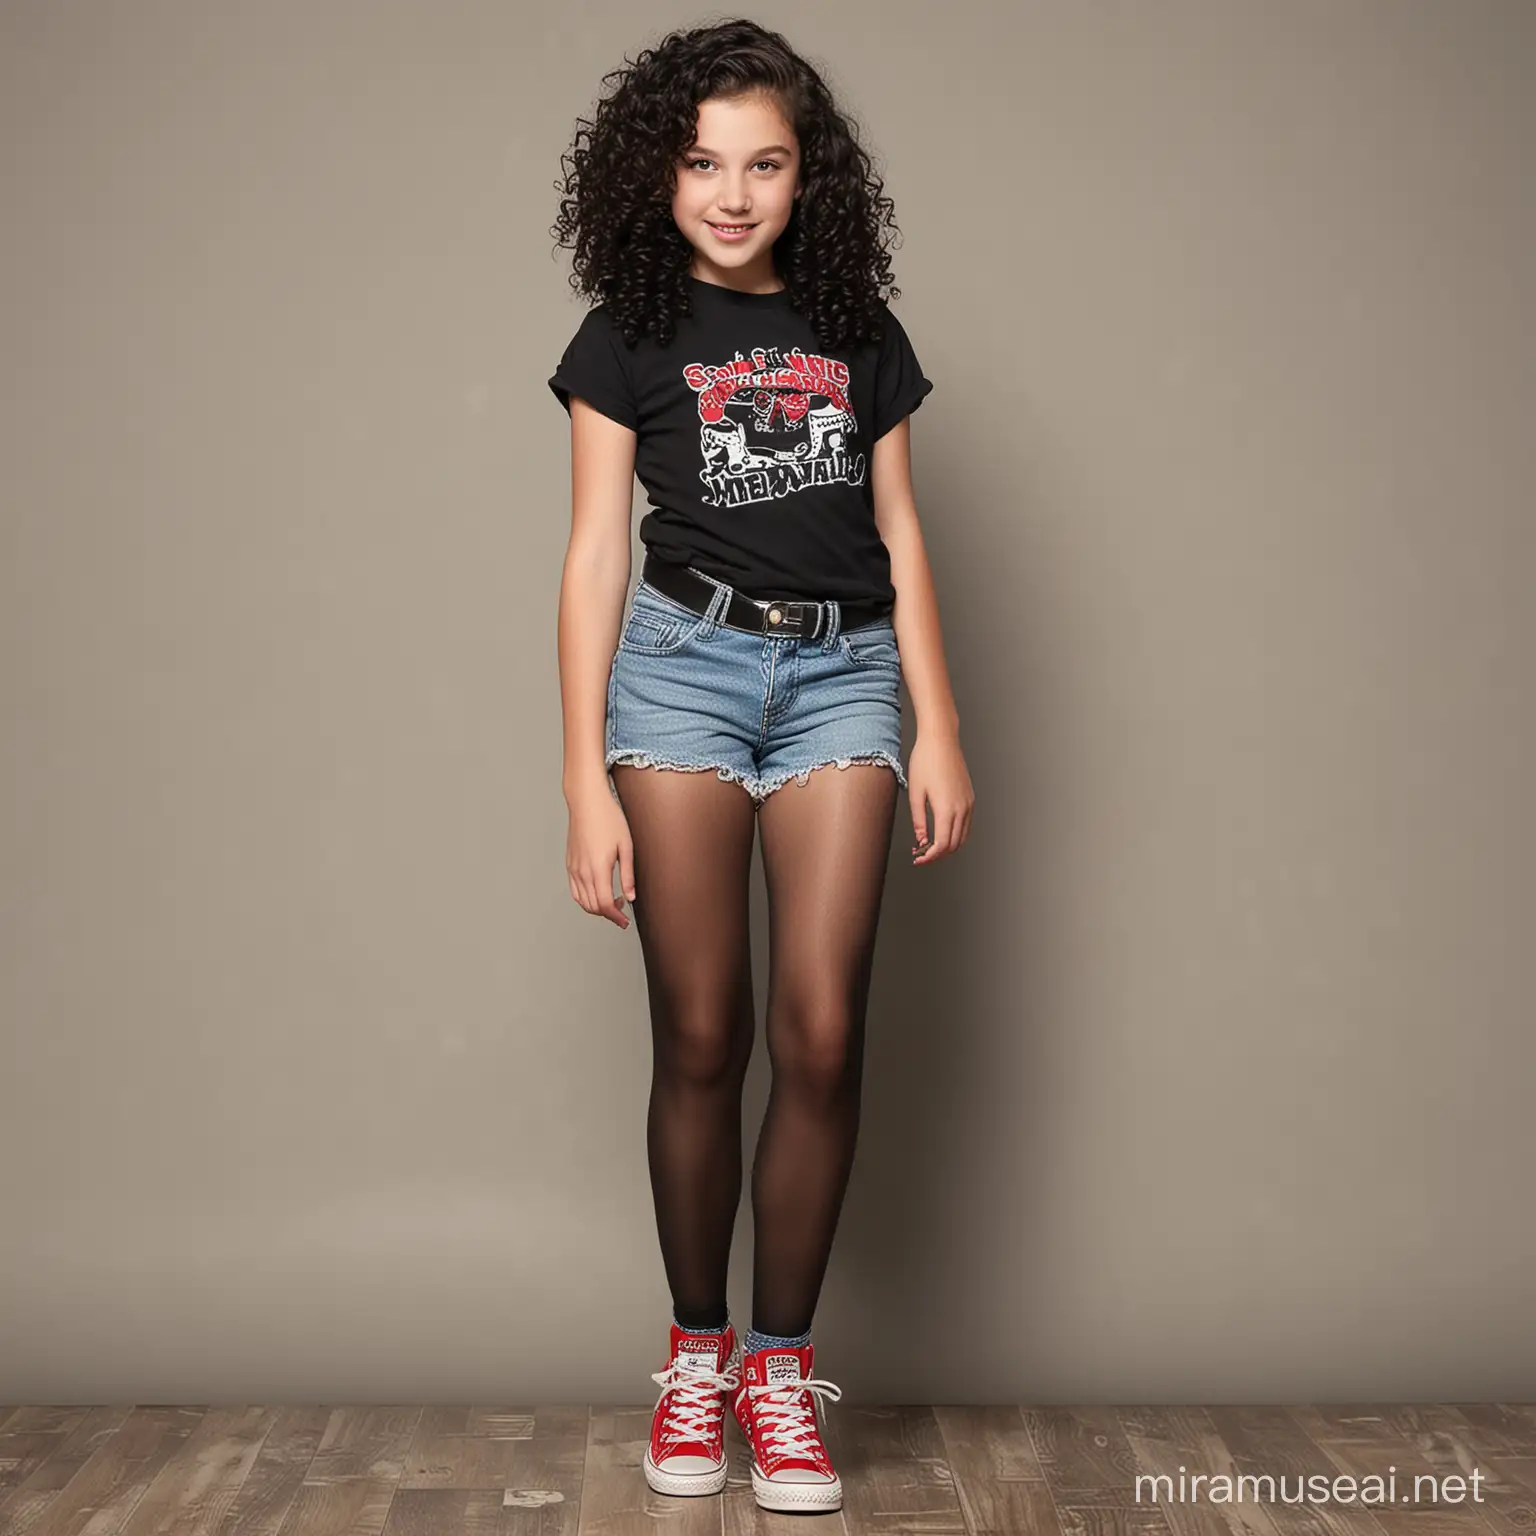 Black CurlyHaired 12YearOld Girl in Red Converse Shoes and Jean Shorts